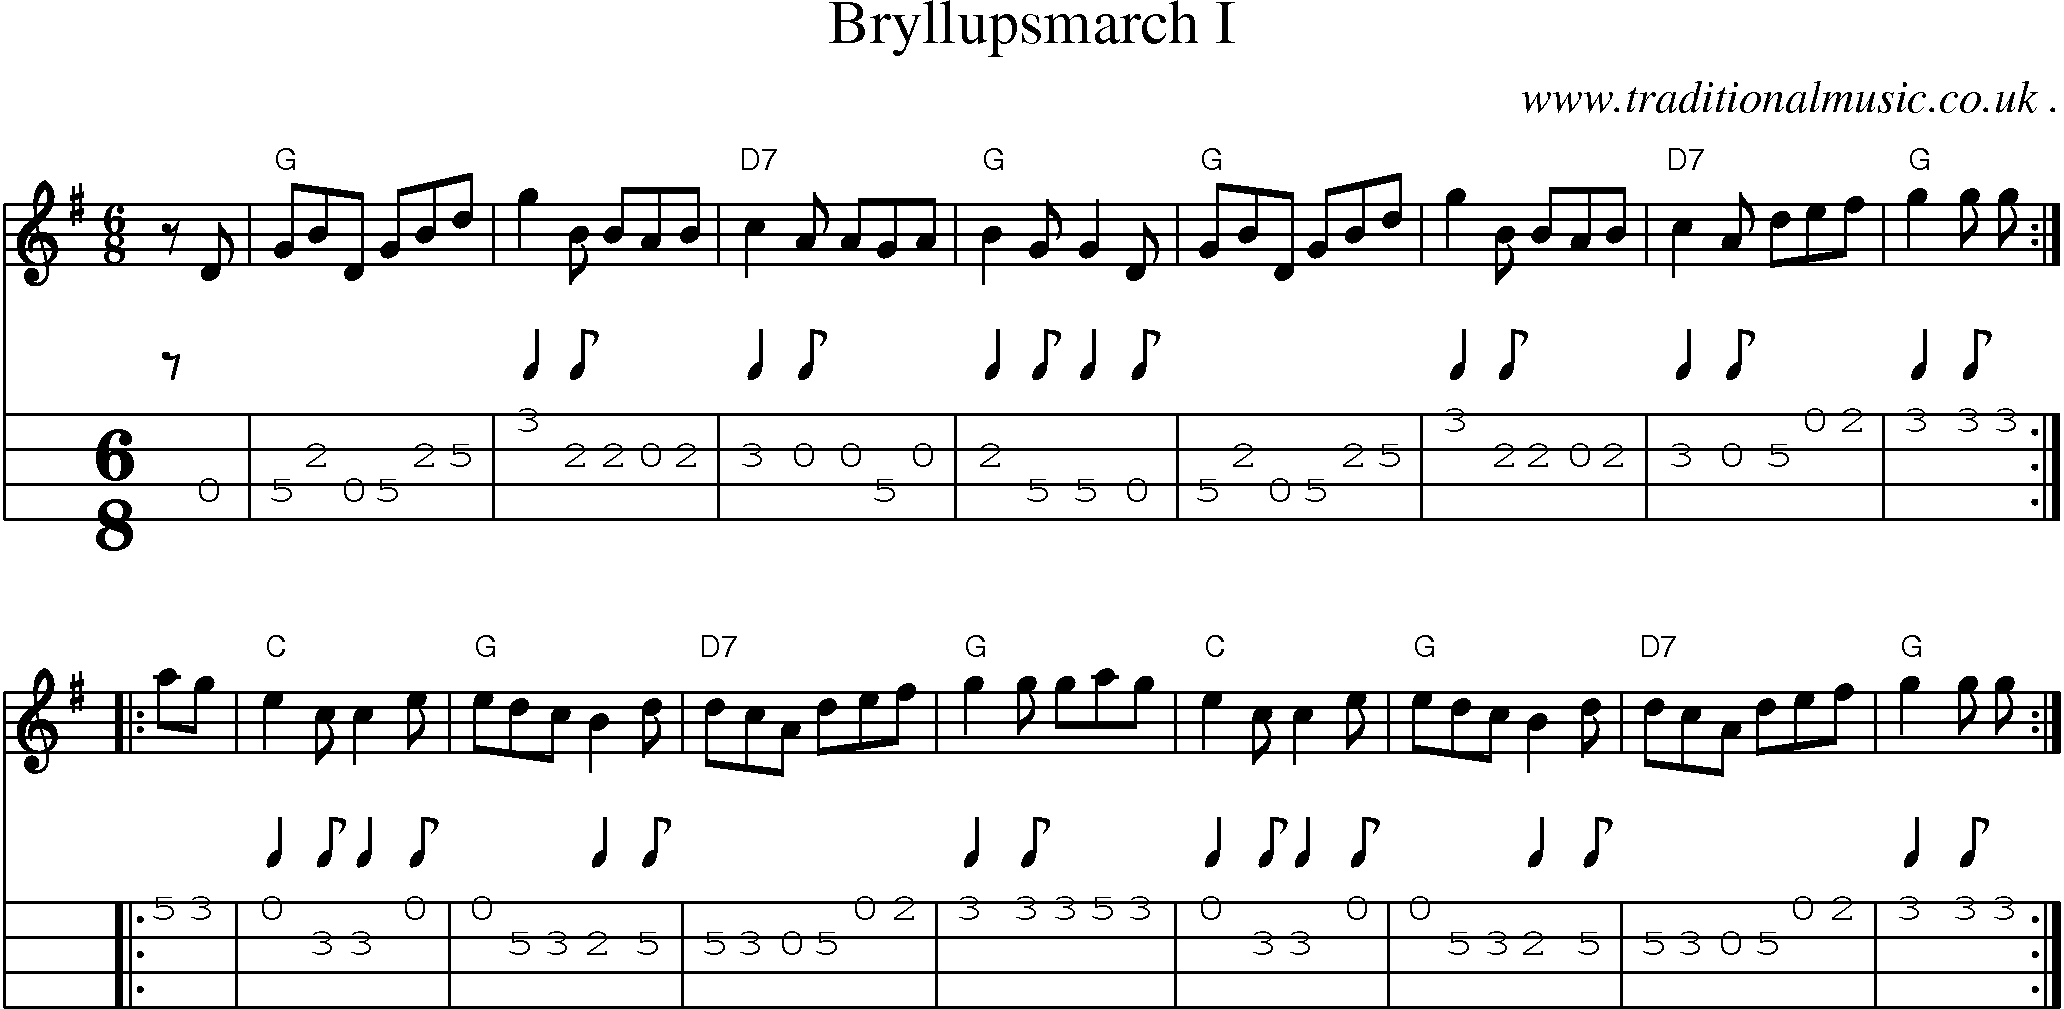 Sheet-music  score, Chords and Mandolin Tabs for Bryllupsmarch I